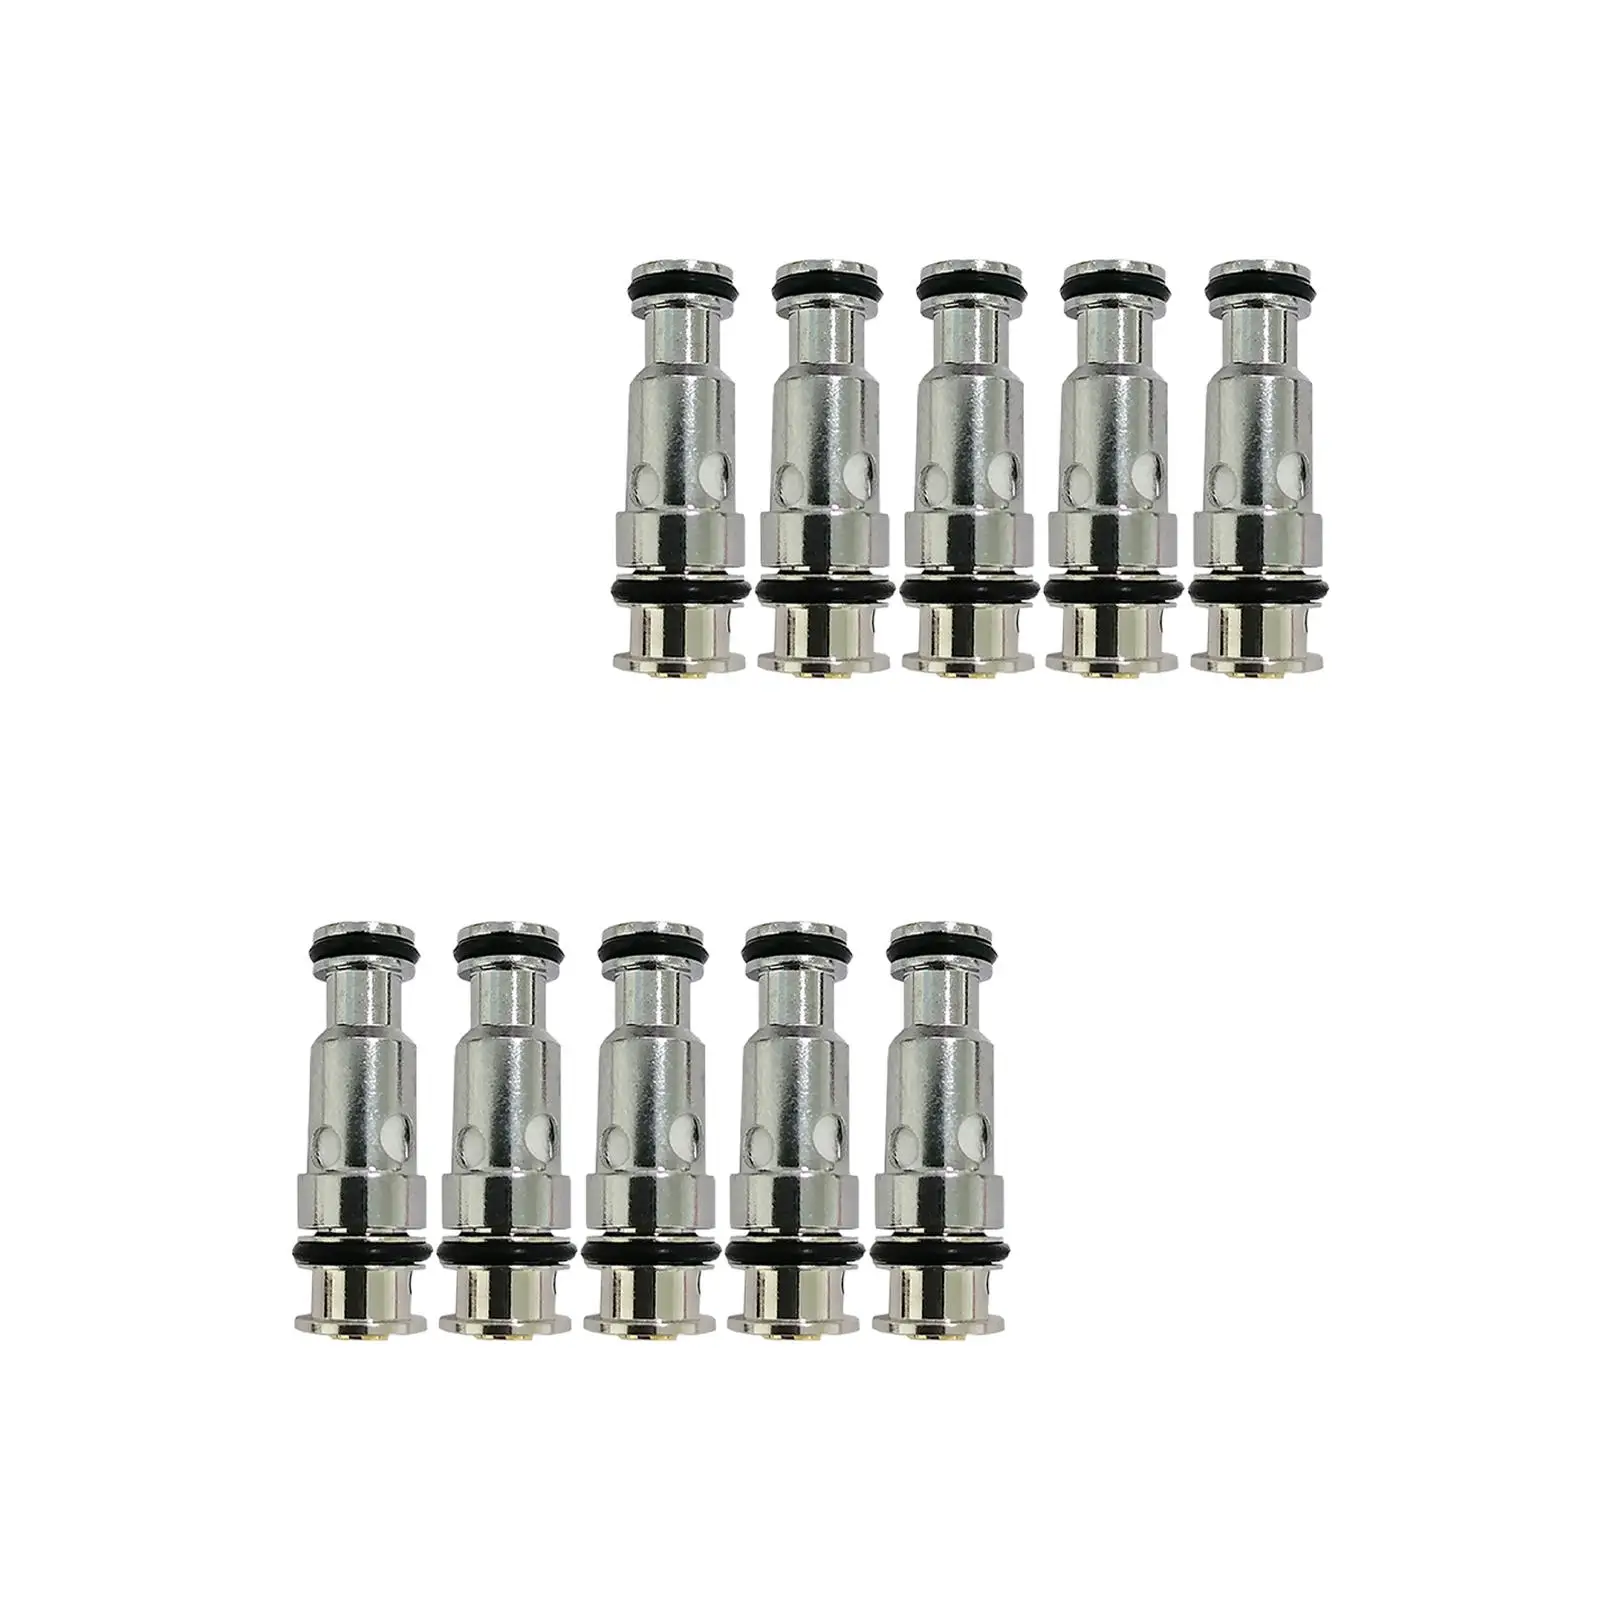 5Pcs PNP Coils Durable Plug in Play Easy Use Stainless Steel for Argus Air 857 Accs Parts